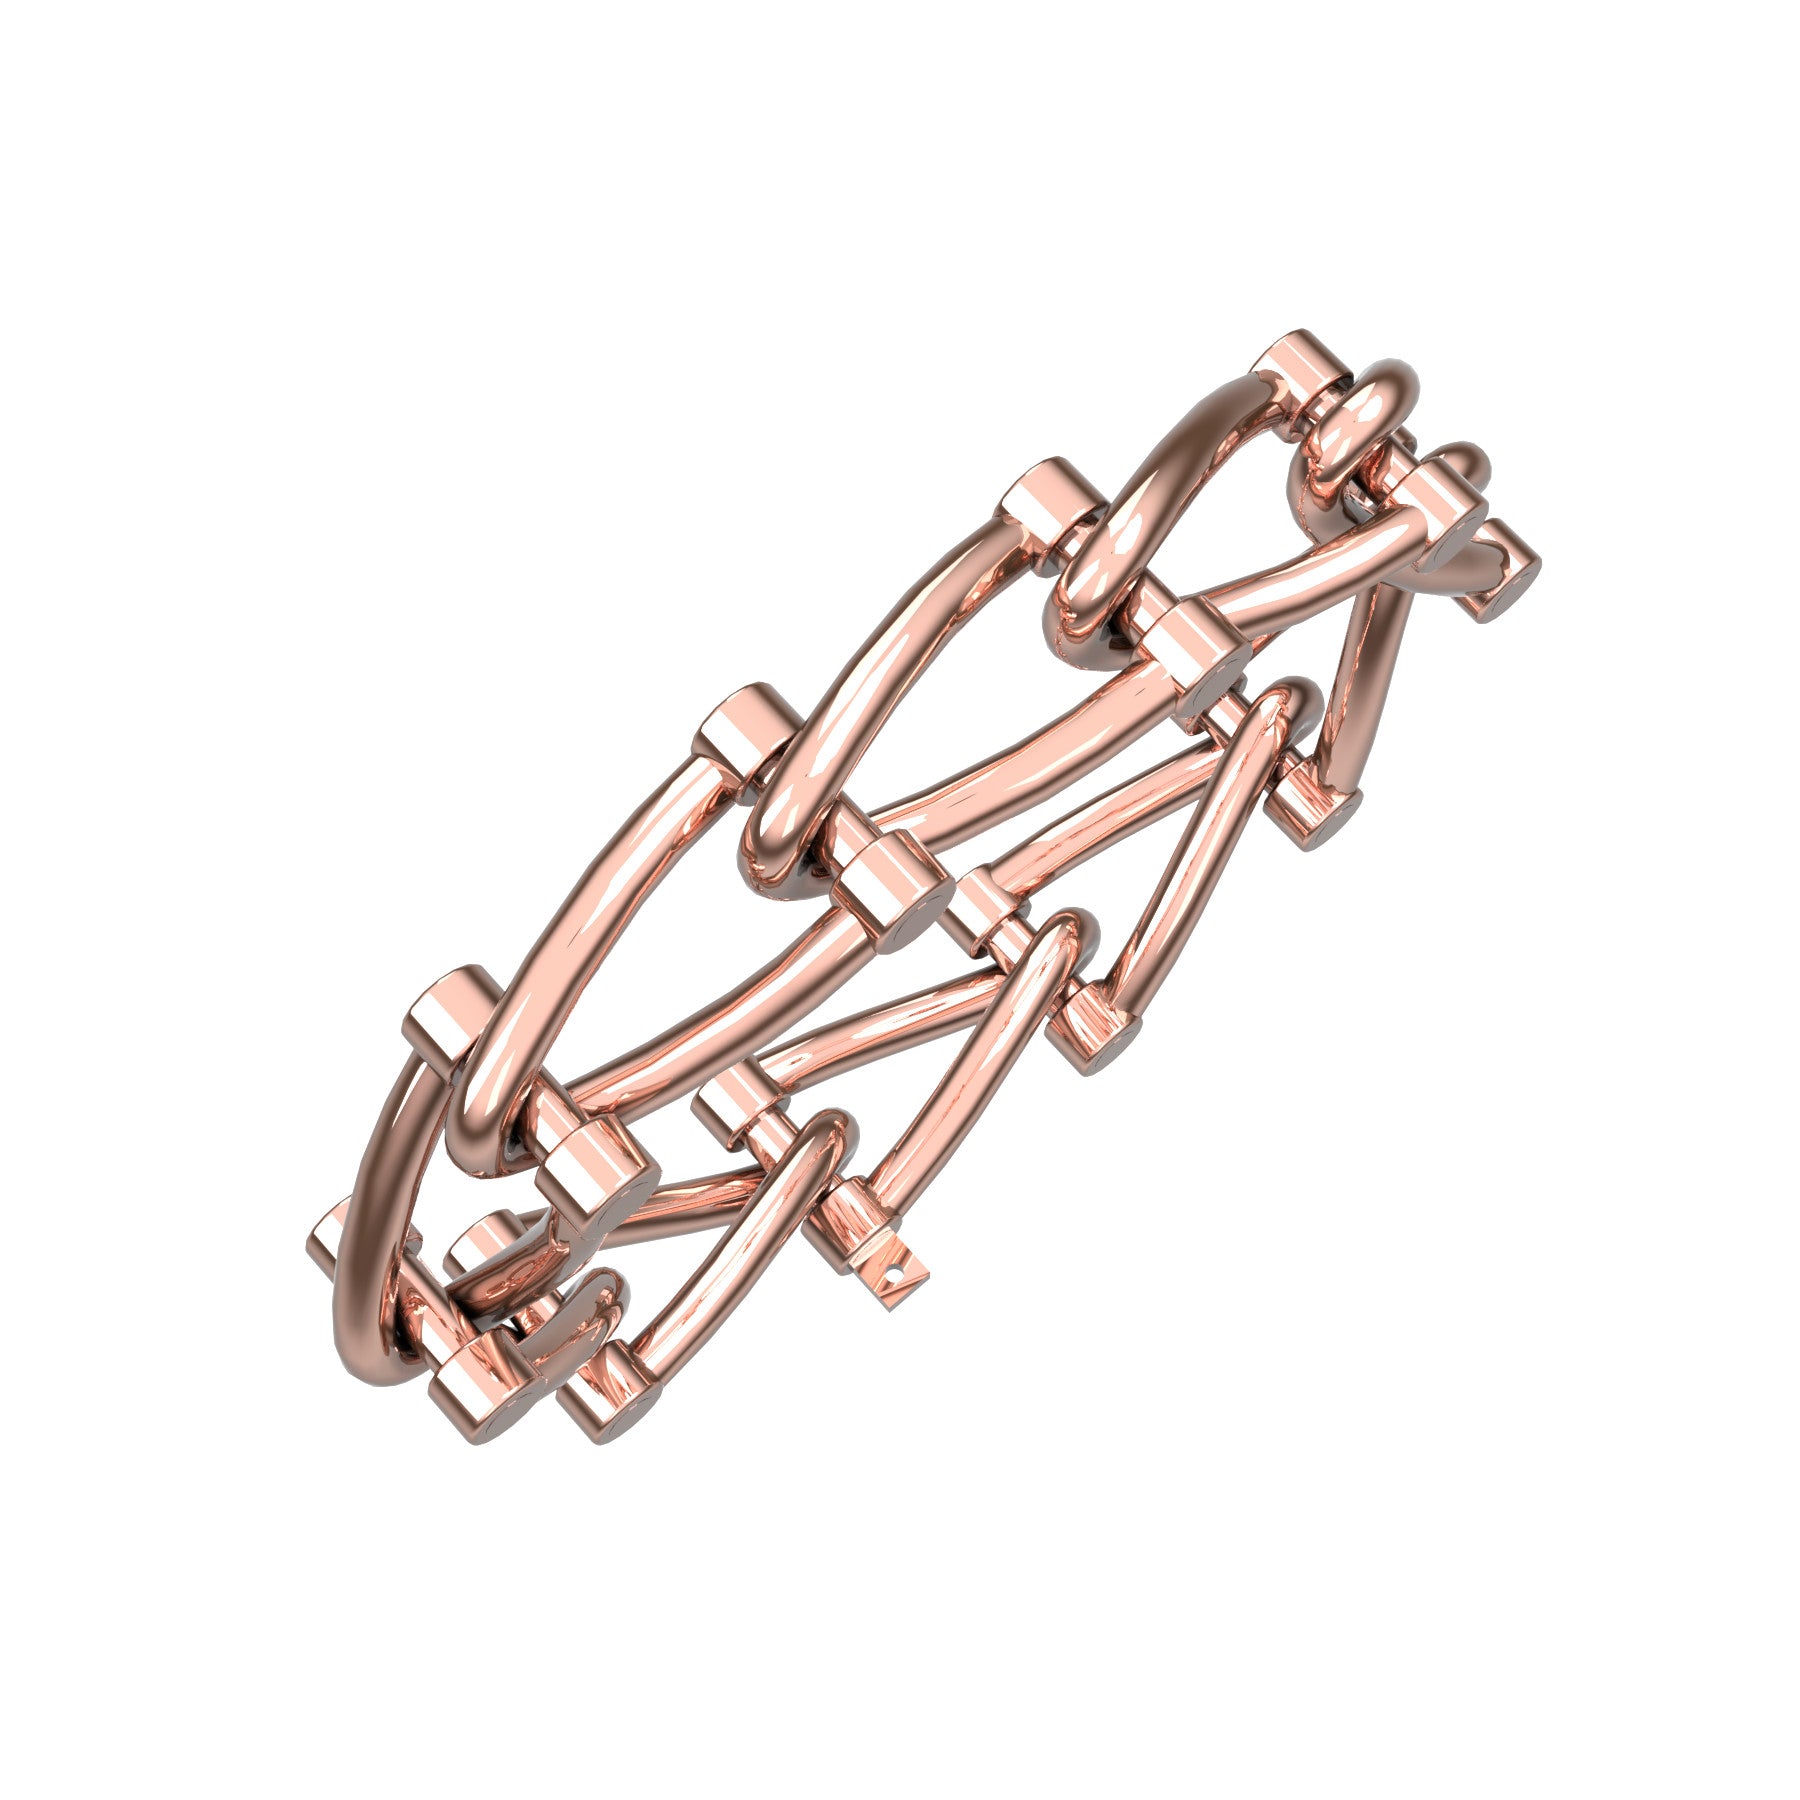 marine links bracelet, 18 K pink gold, weight about 48,2 to 75,0 g (1.70 to 2.64 oz), width 12 mm max